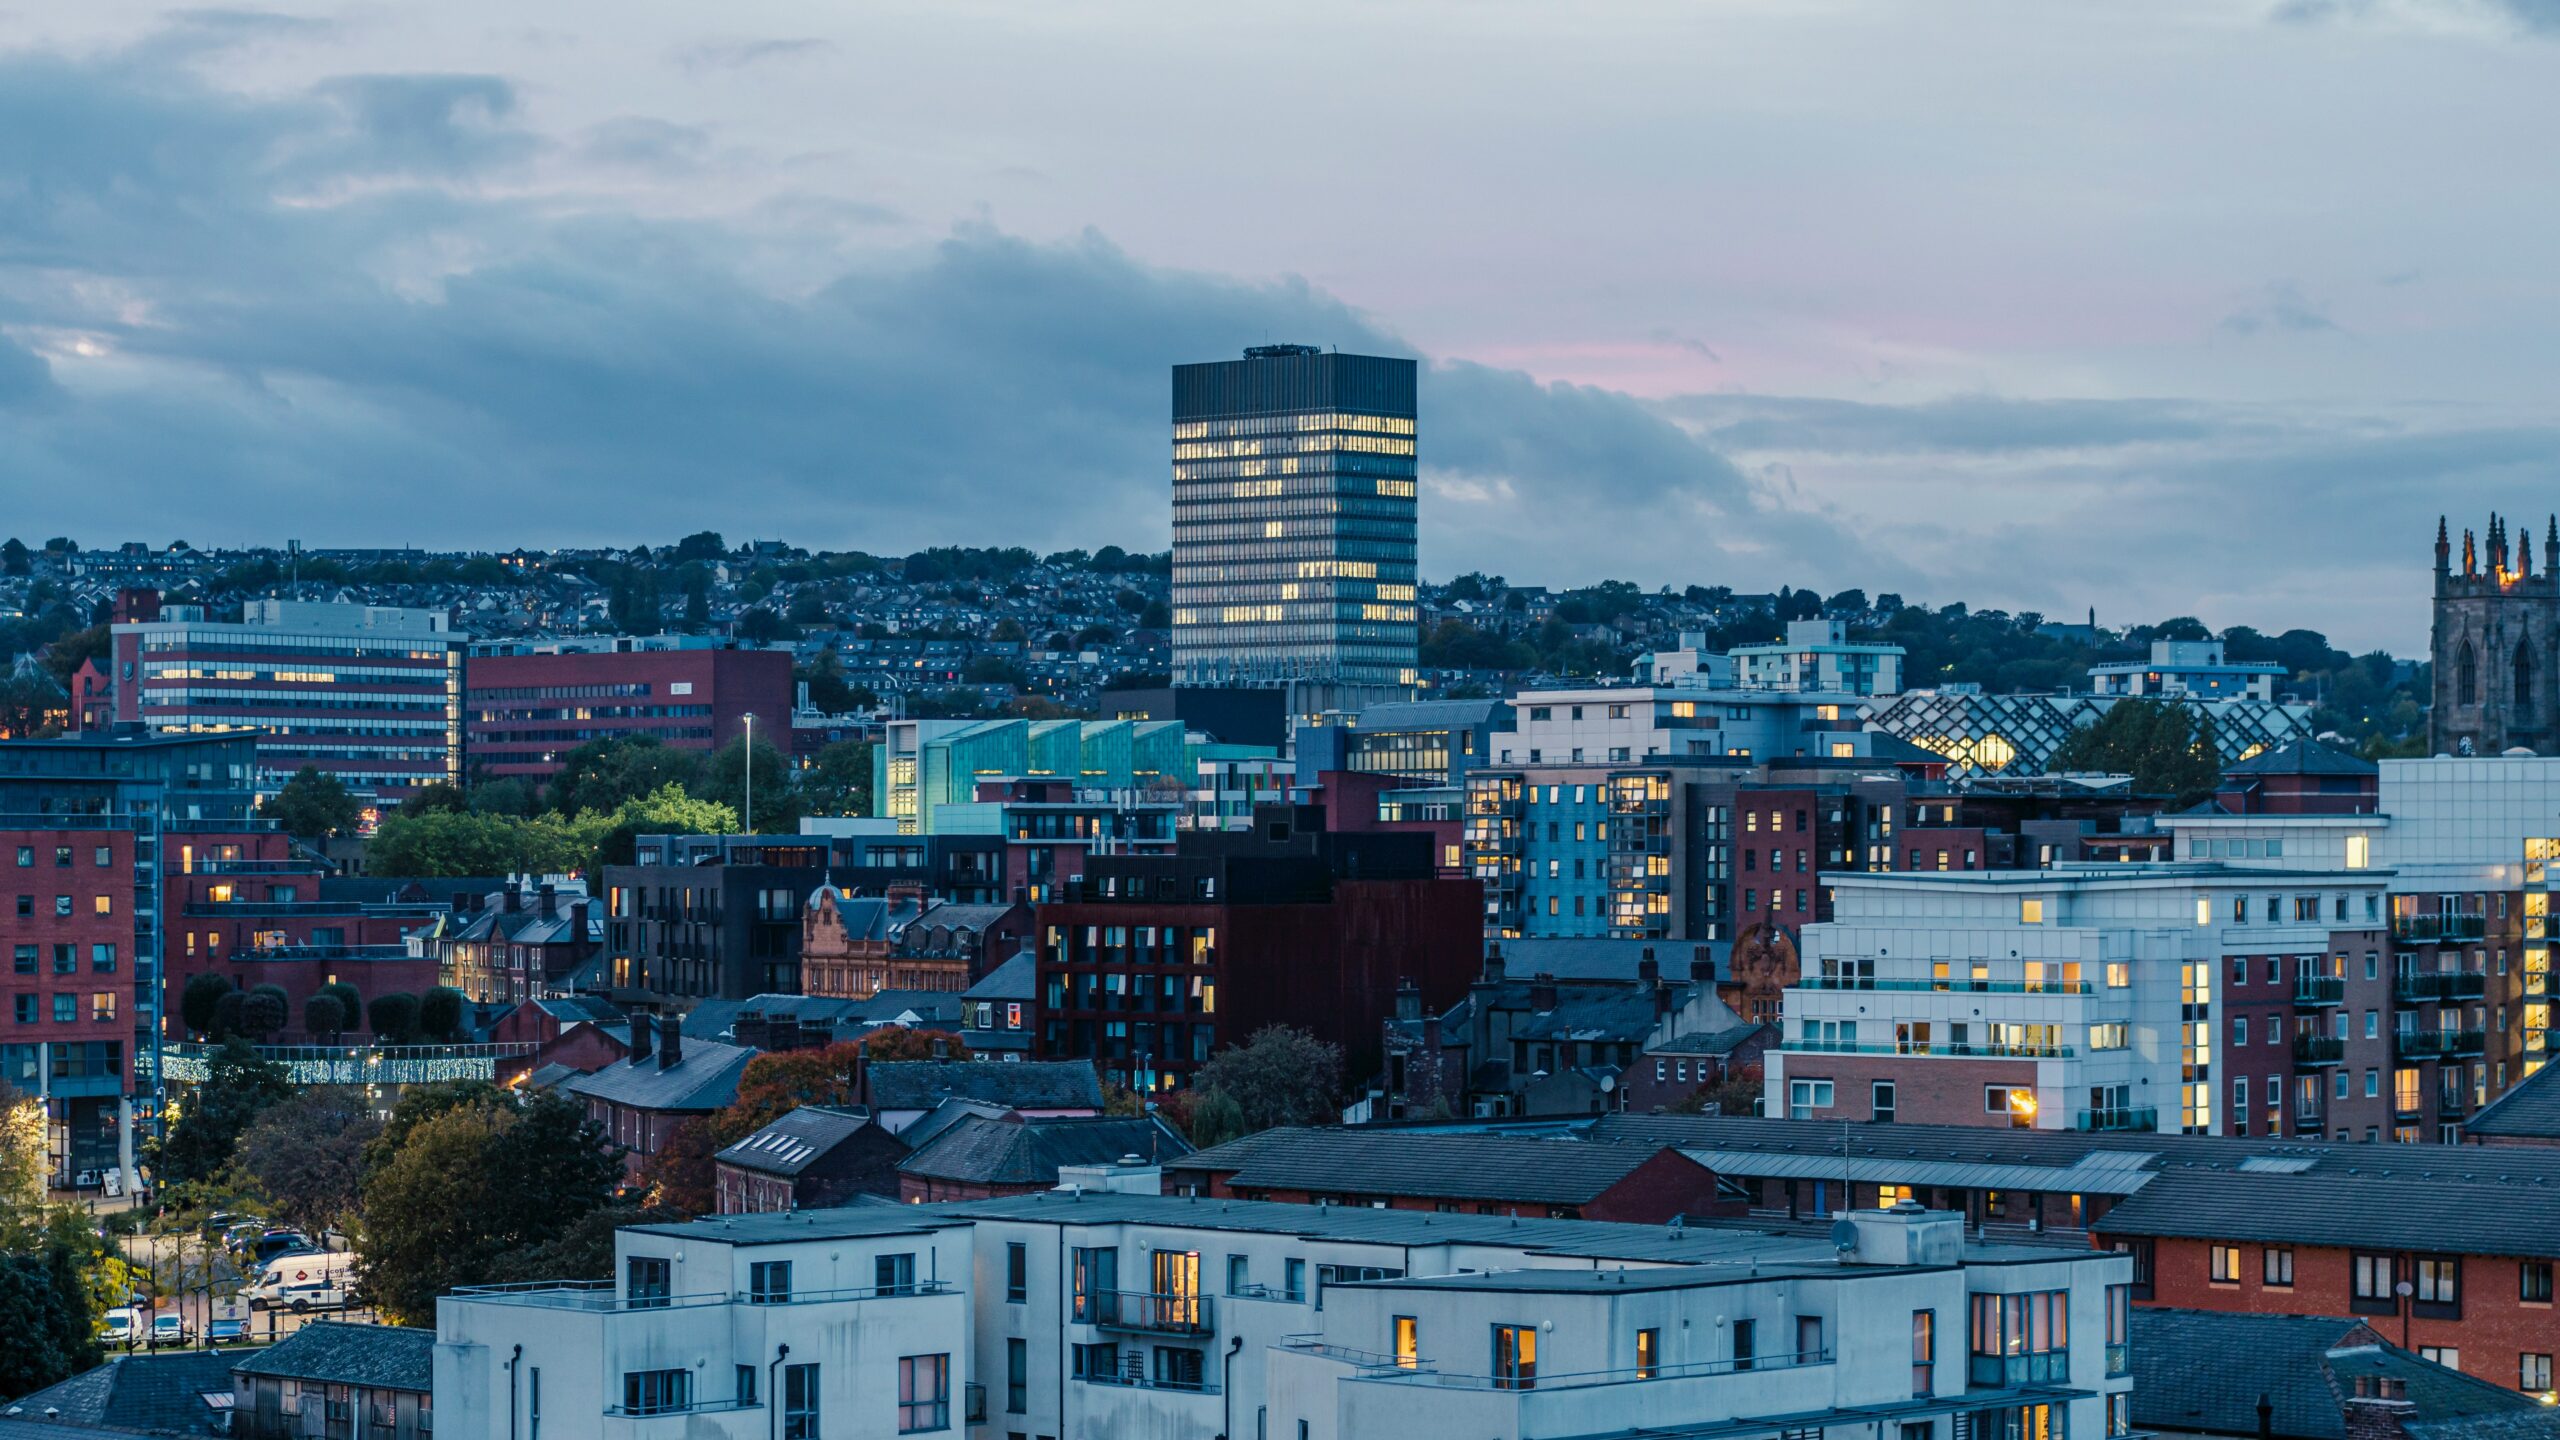 The Sheffield city skyline at dusk, showing the arts tower in the distance.